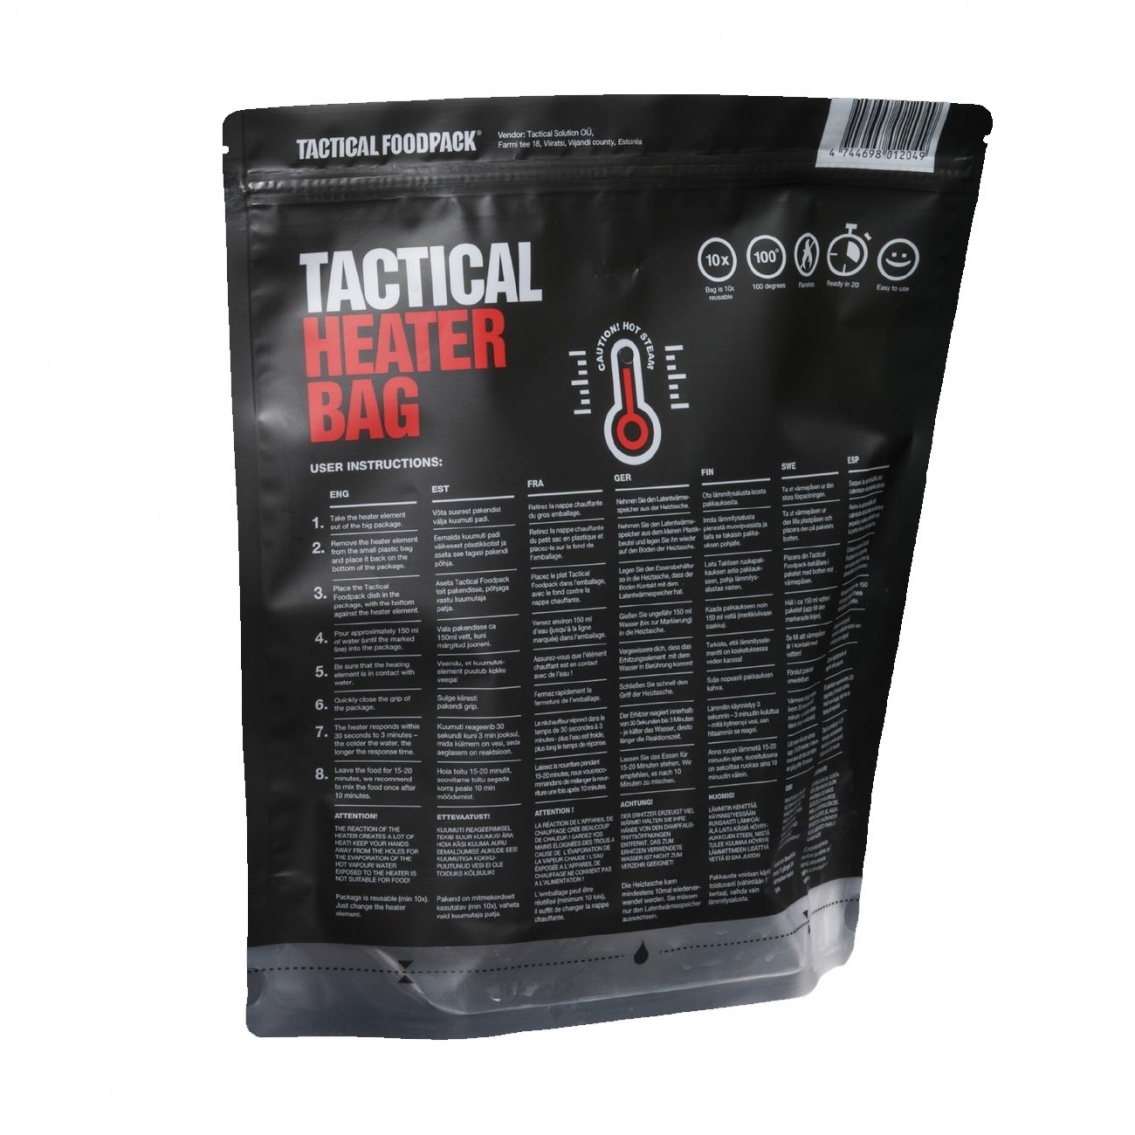 Tactical Foodpack Heater Bag with element - Incalzitor mancare - 1